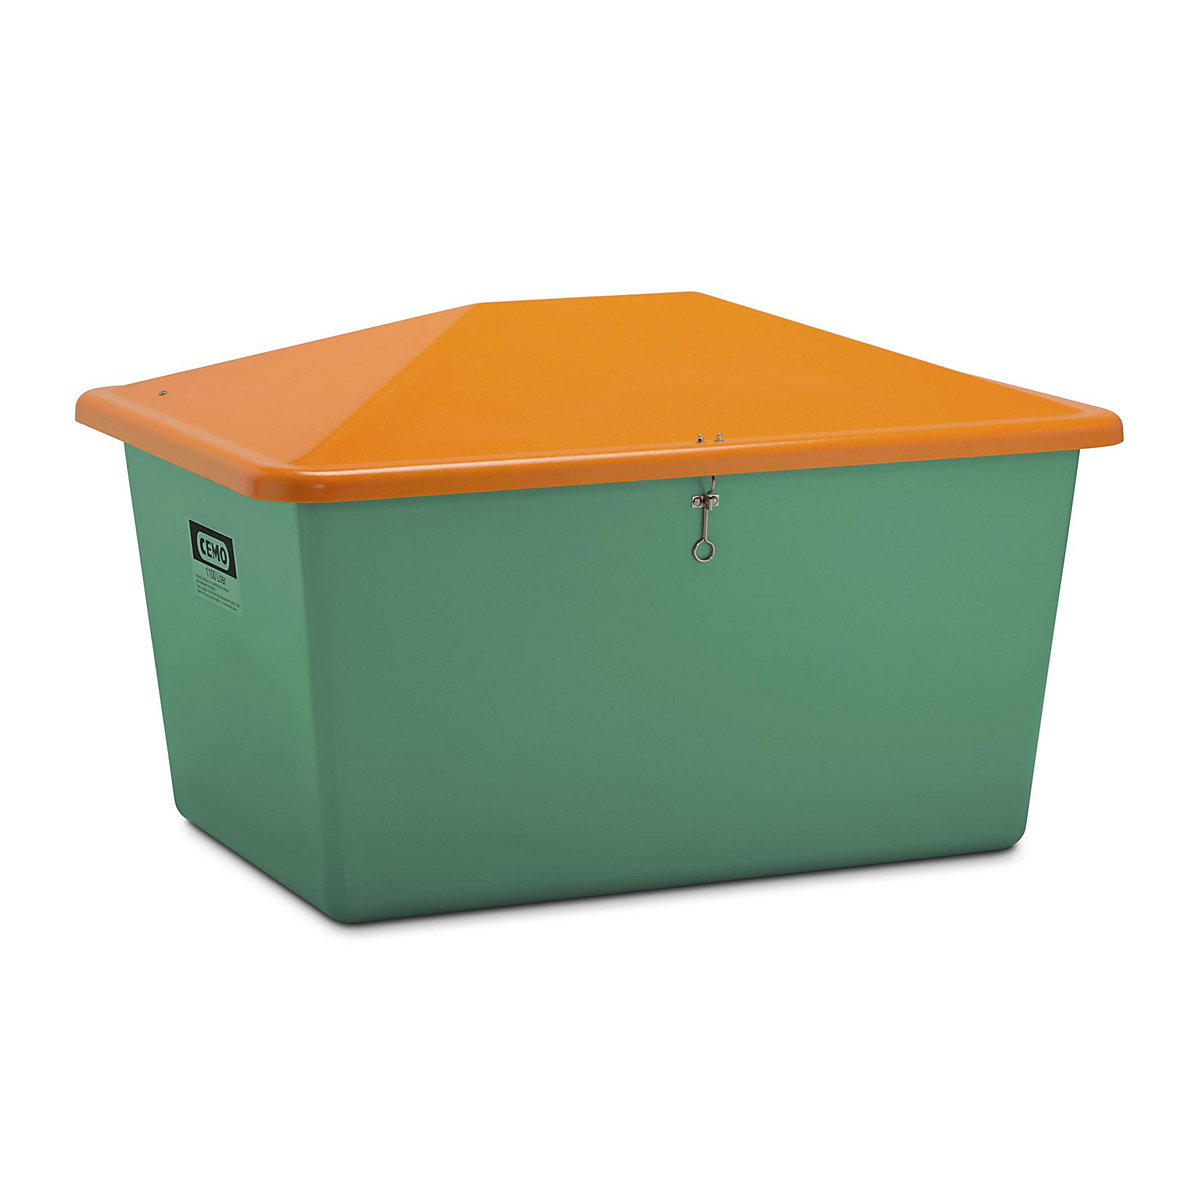 Grit container made of GRP – CEMO, capacity 1100 l, without dispenser opening, green container-4